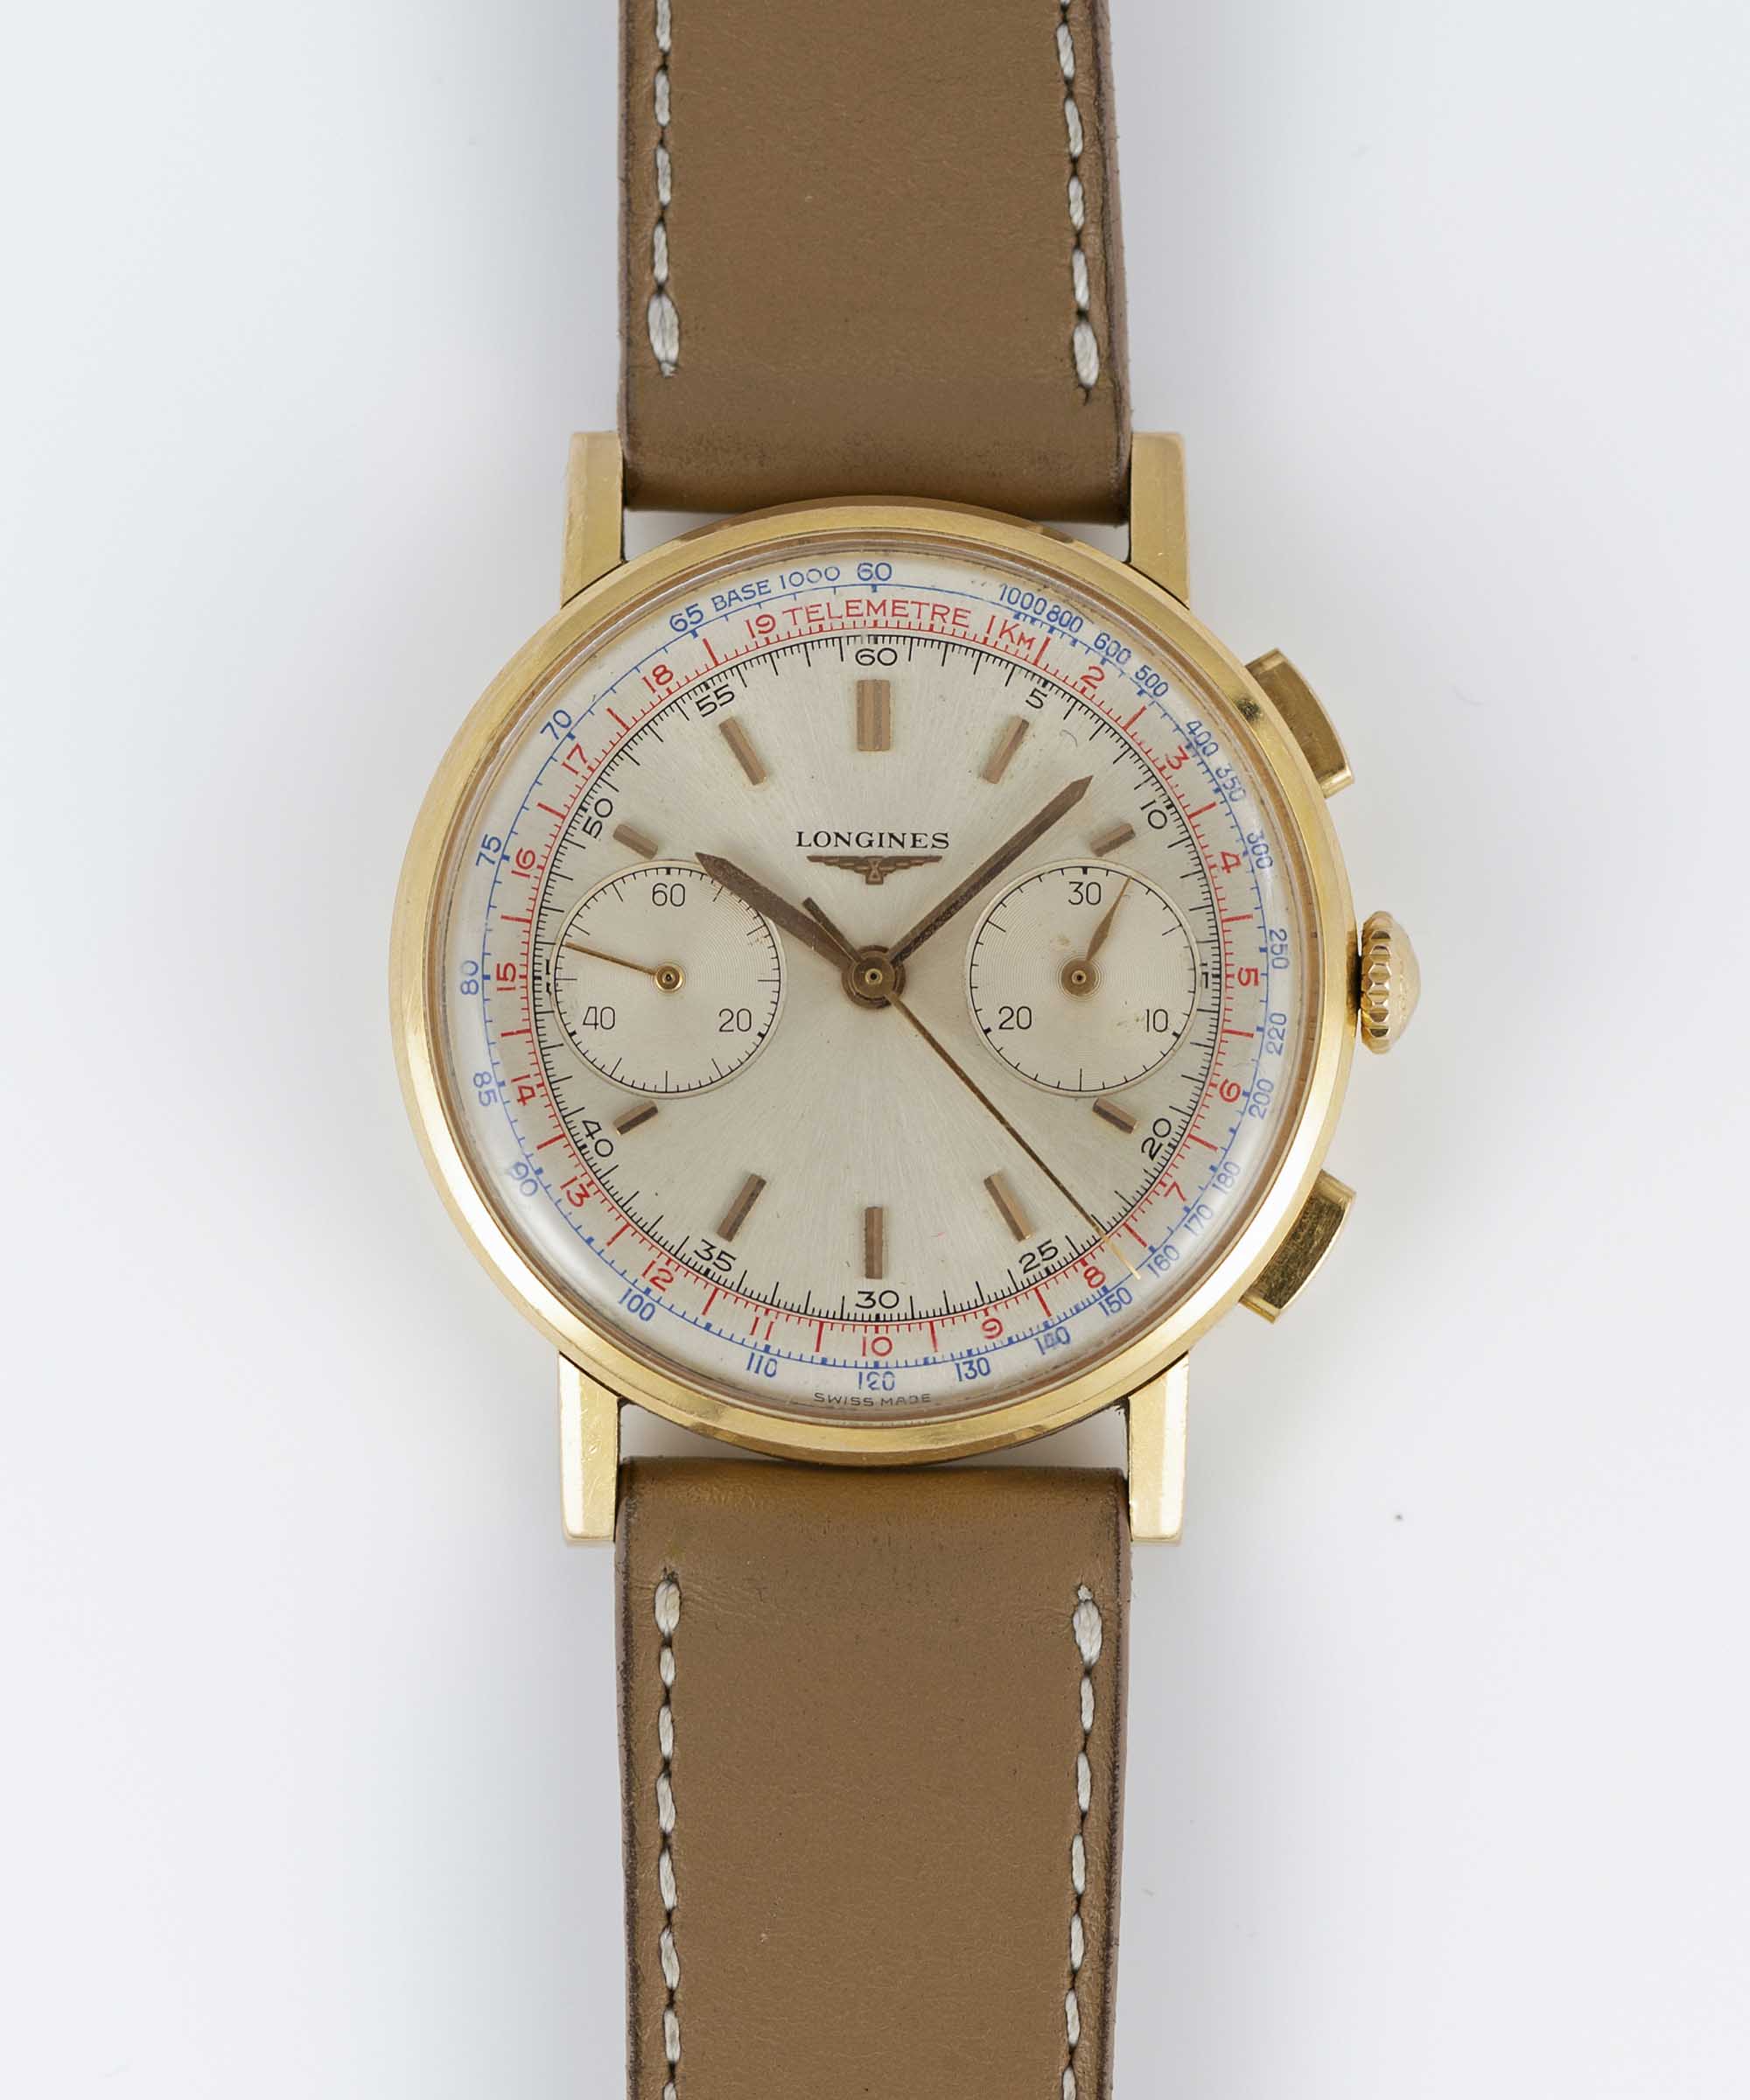 A GENTLEMAN'S 18K SOLID YELLOW GOLD LONGINES FLYBACK CHRONOGRAPH WRIST WATCH DATED 1969, REF. 7414 - Image 2 of 9